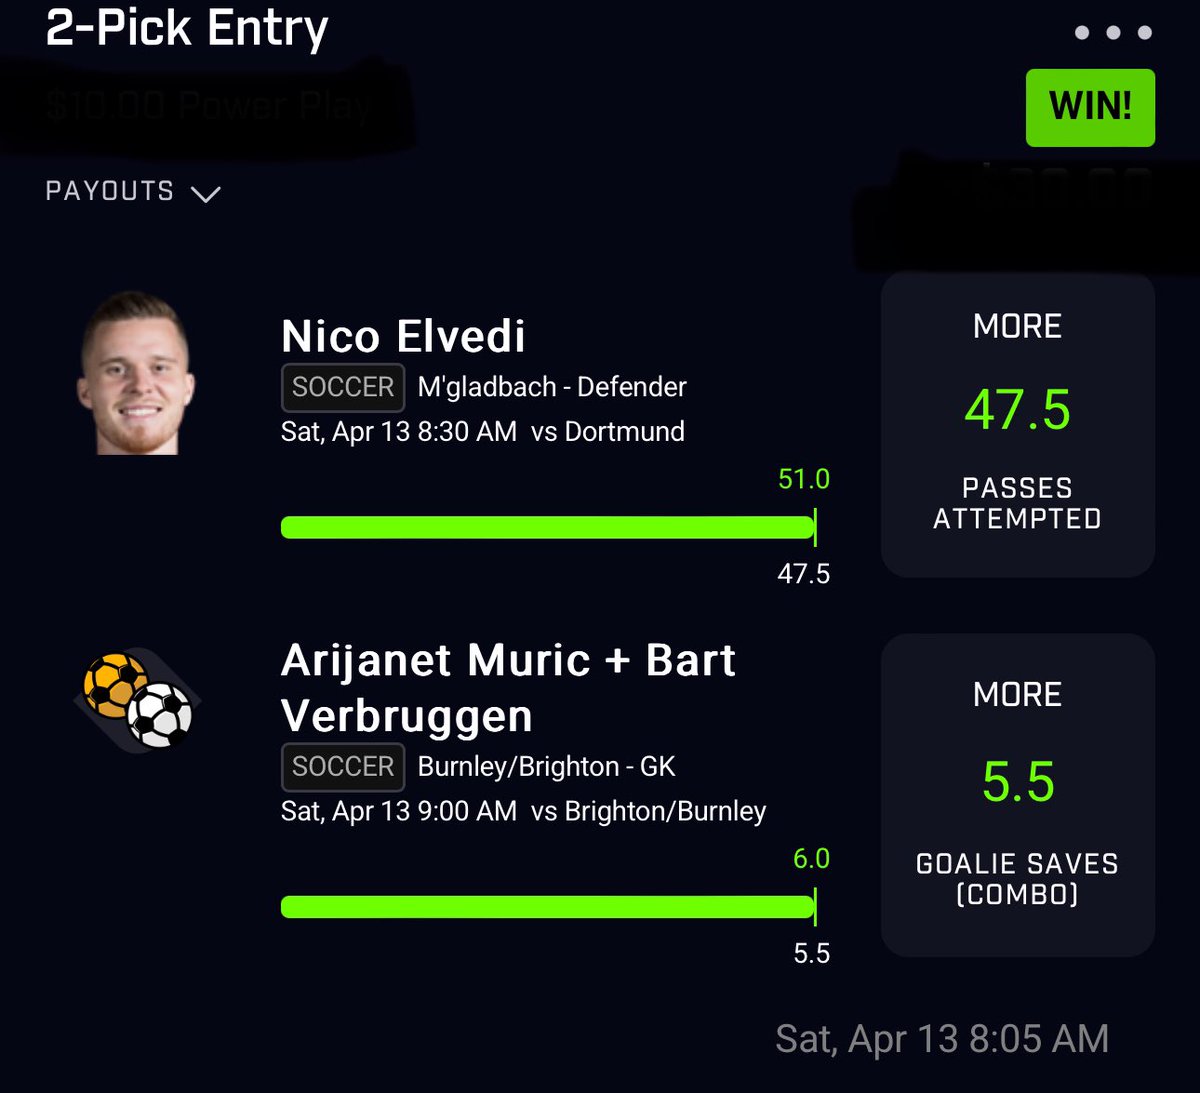 It's always green on here another successful subsciber cash out Join the Link below 👇
t.me/+c-EYn4cfaO84Y…

#PrizePicks | #PrizePicksNBA #NBA       #NBATwitter #prizepicksmlb #PrizePicks #freeplays #potd #nukes #bettingpicks #GambingX #chalkboard